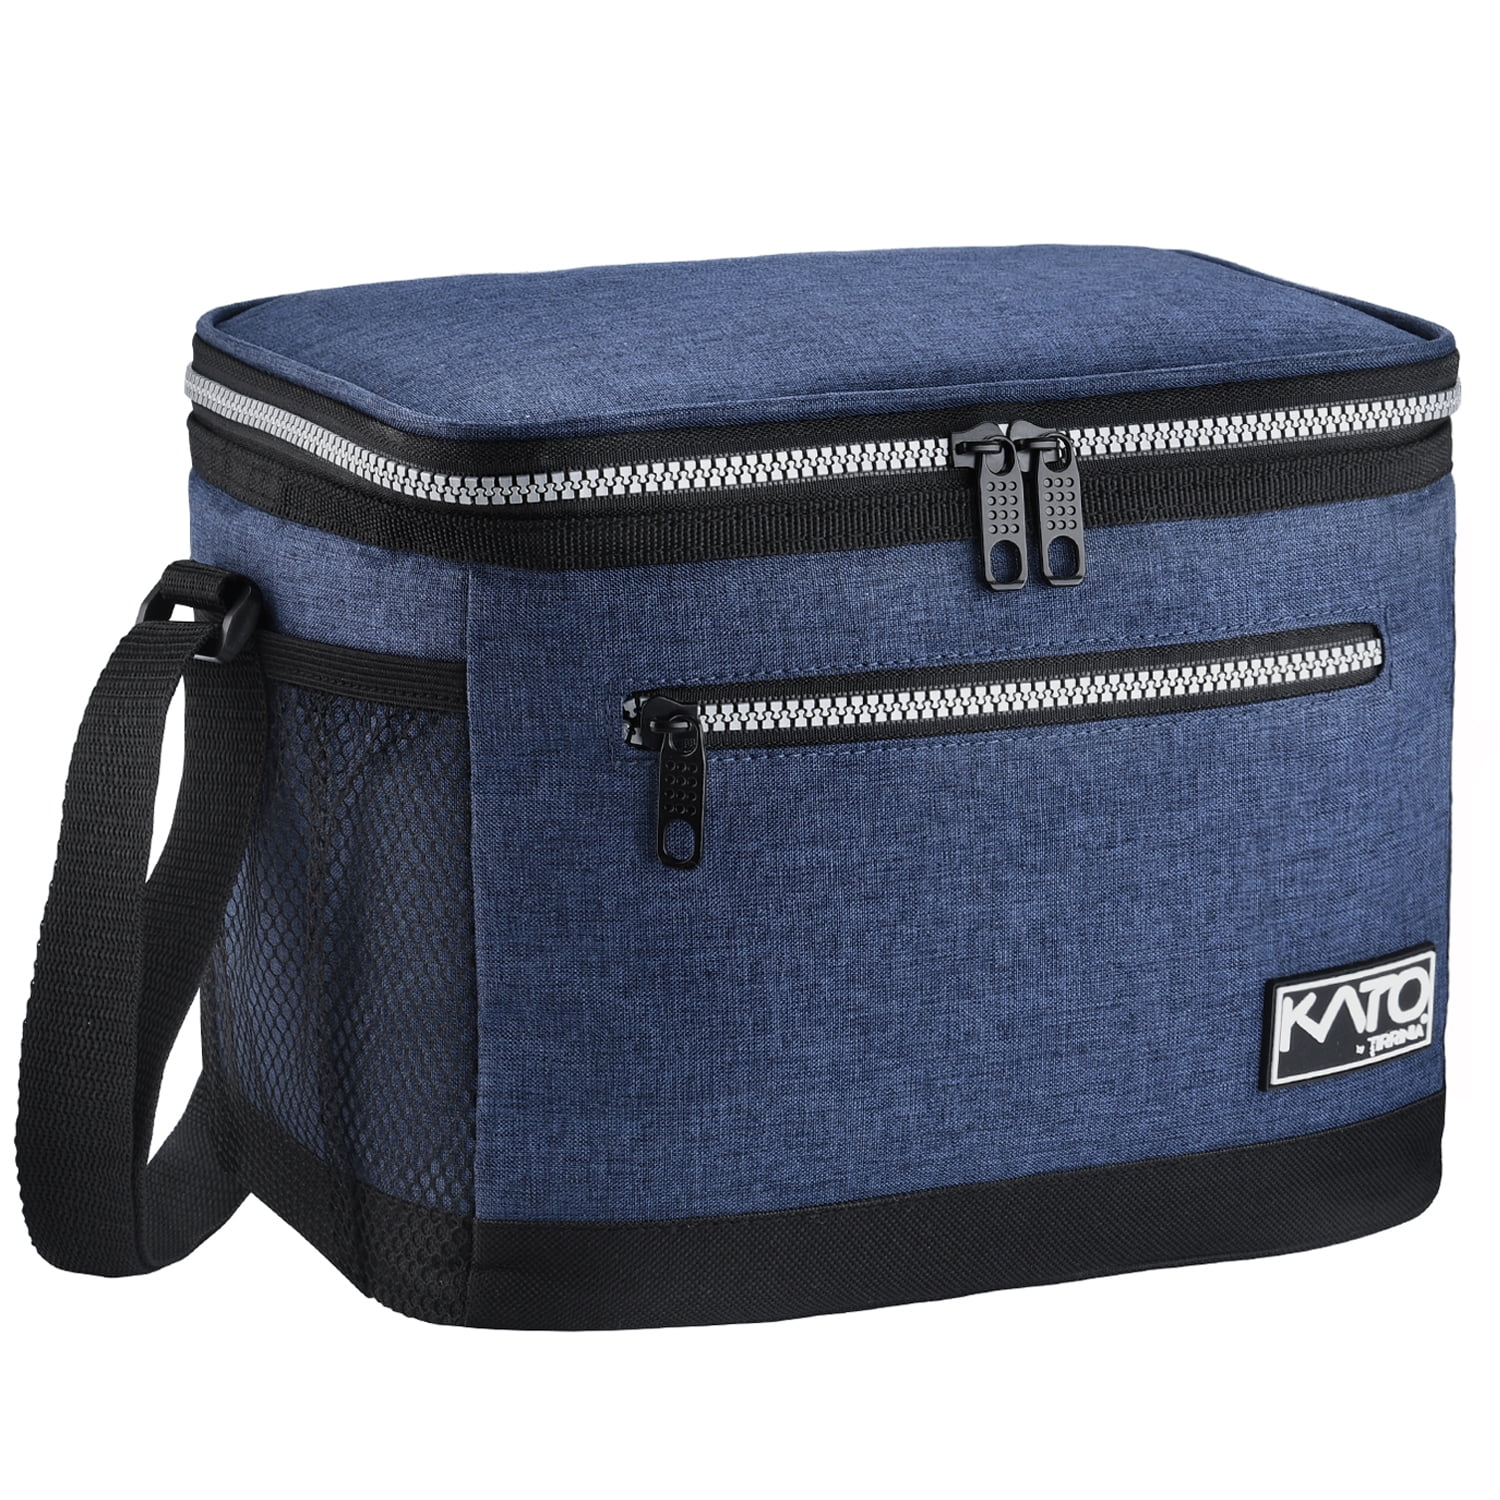 Insulated Lunch Box for Women Men Thermal Cooler Tote Food Lunch Storage Bag 